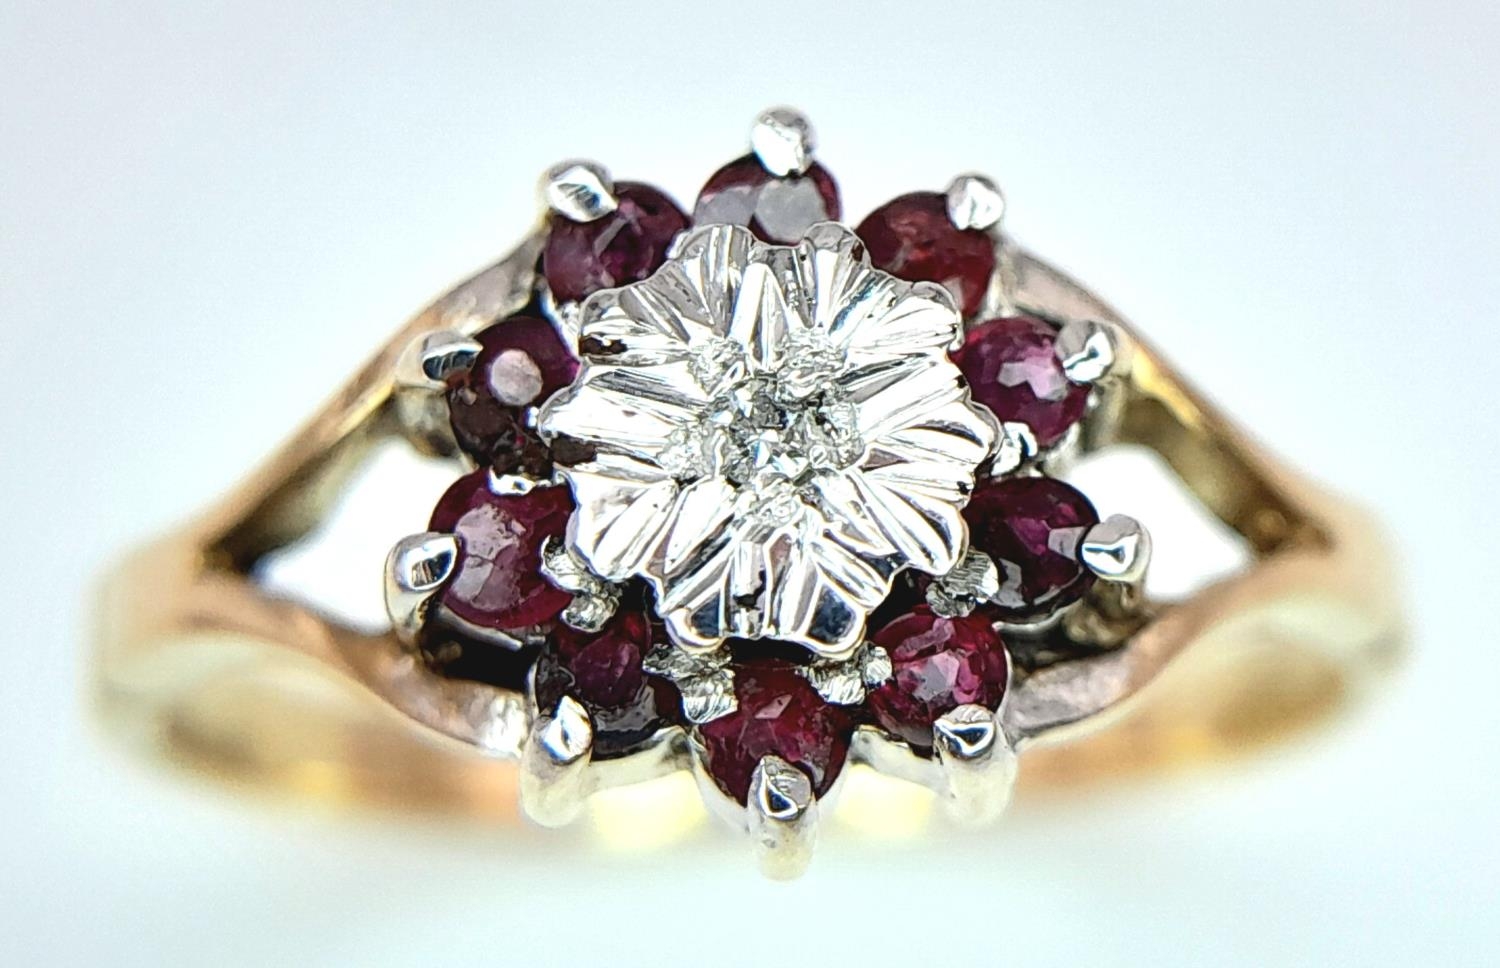 A 9K (TESTED AS) YELLOW GOLD DIAMOND & RUBY CLUSTER RING 1.5G SIZE I 1/2. ref: SPAS 9023 - Image 3 of 5